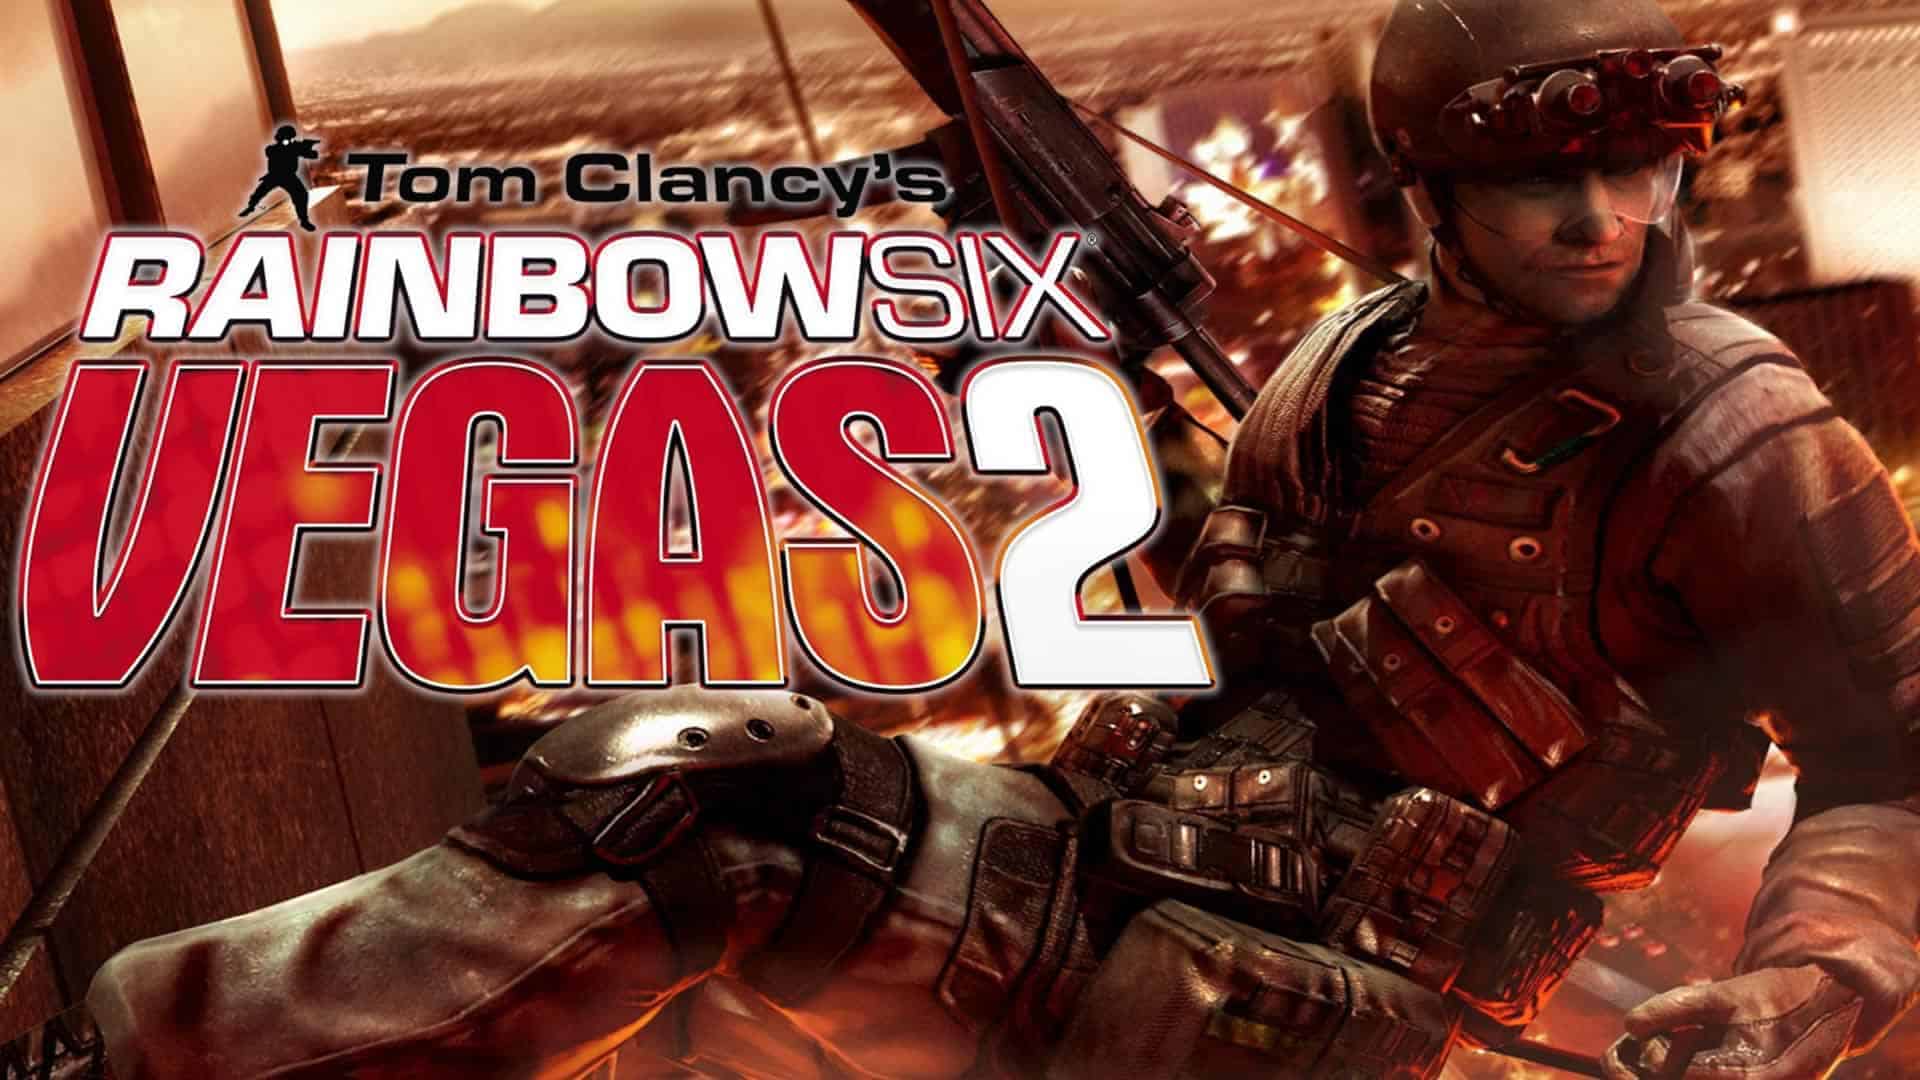 Tom Clancy’s Rainbow Six: Vegas 2 PlayStation 3 Game Full Version Download